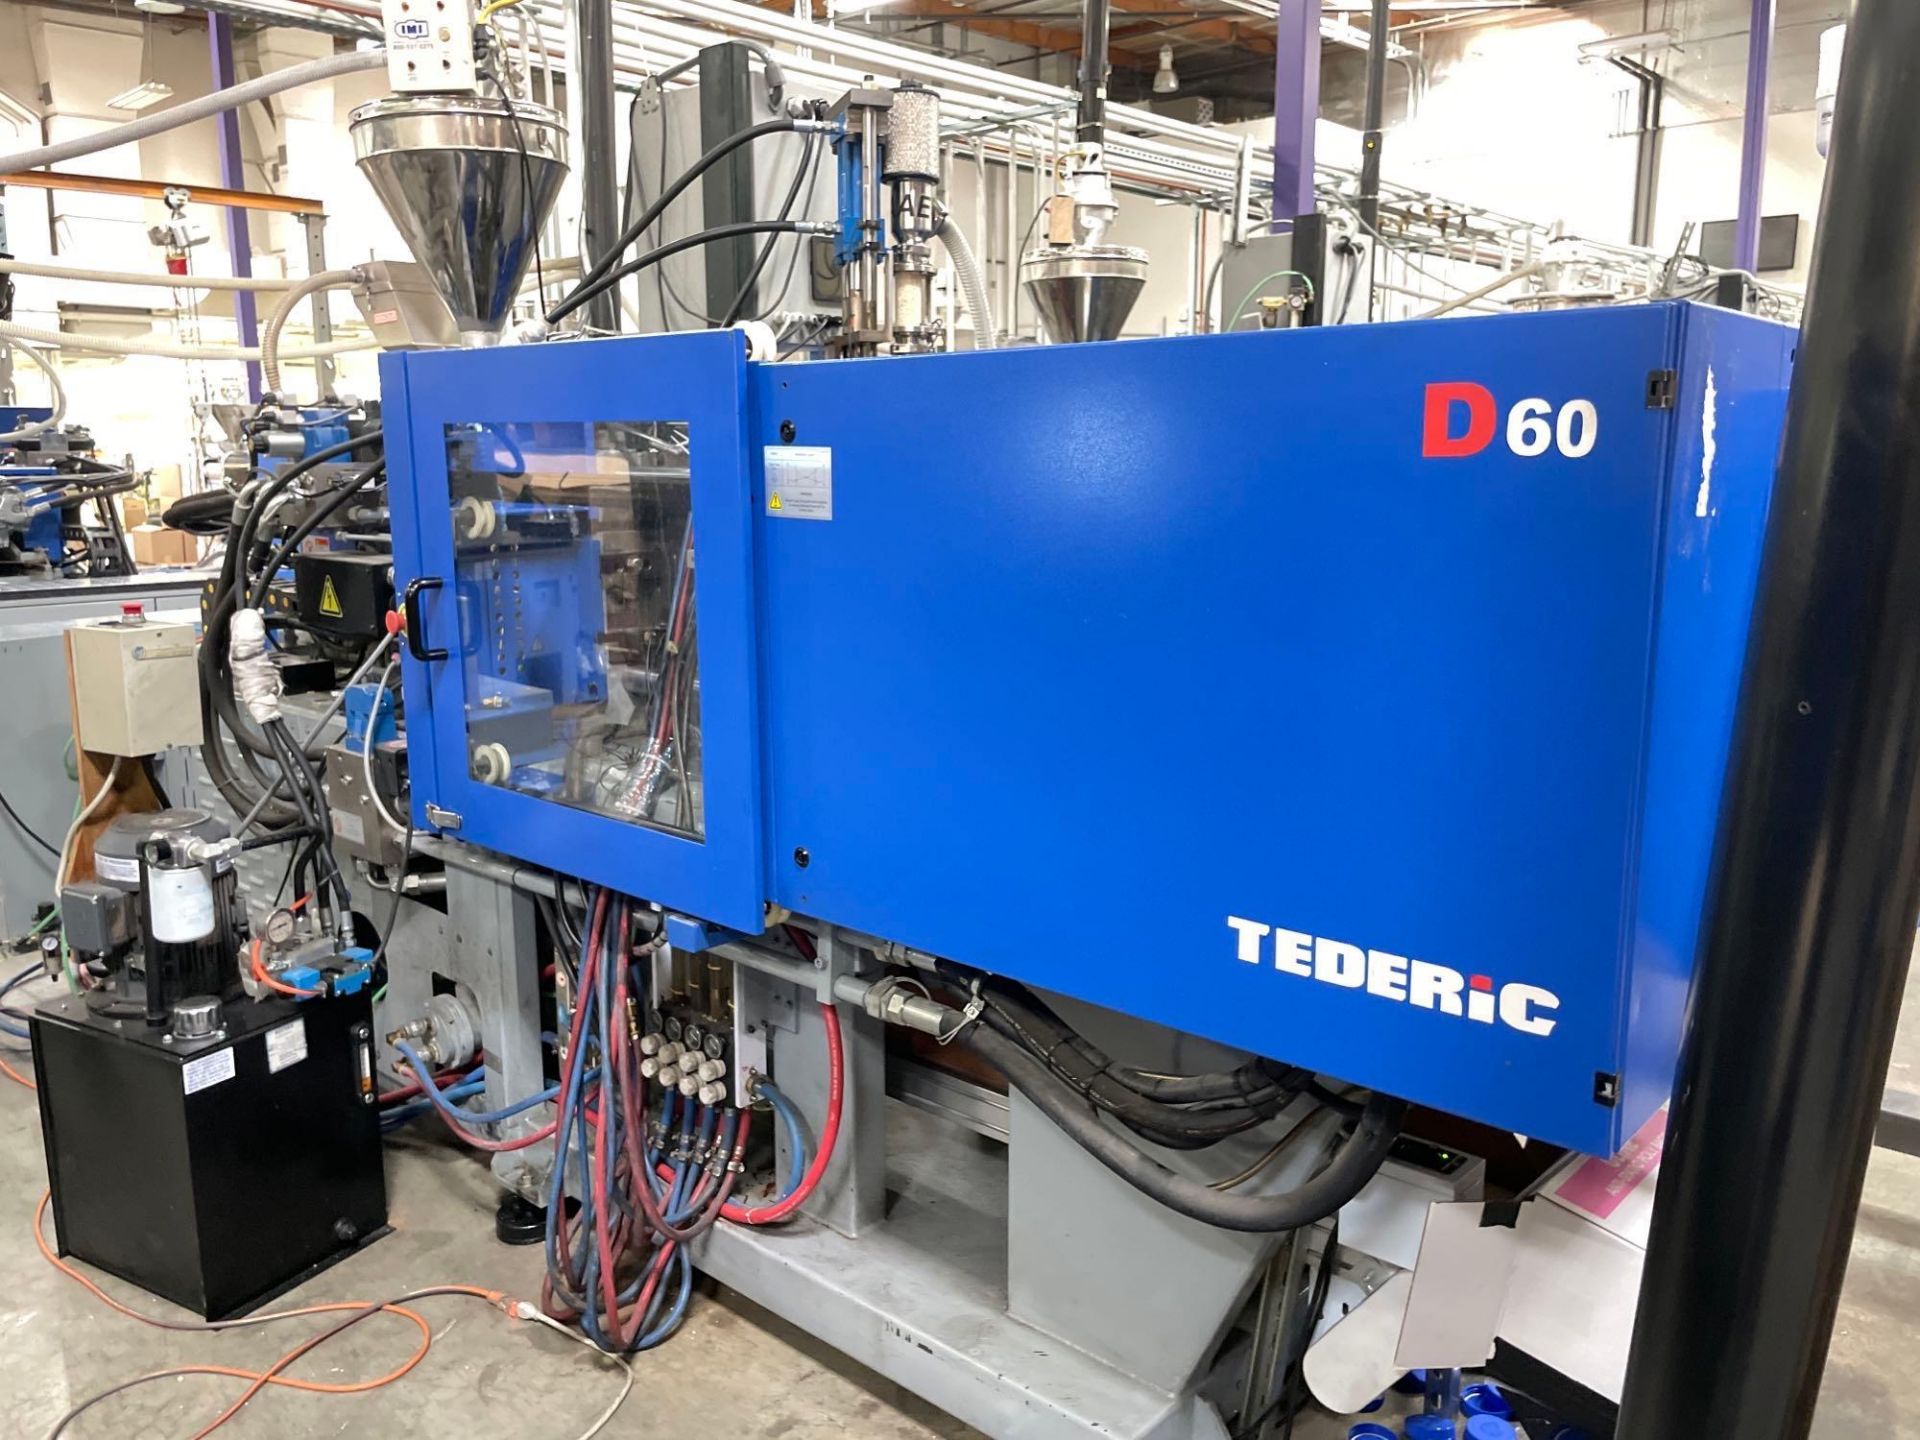 66 Ton Tederic D60 Plastic Injection Molder, Keba 12000 Control, s/n T3008-0200, New 2018 - Image 5 of 17